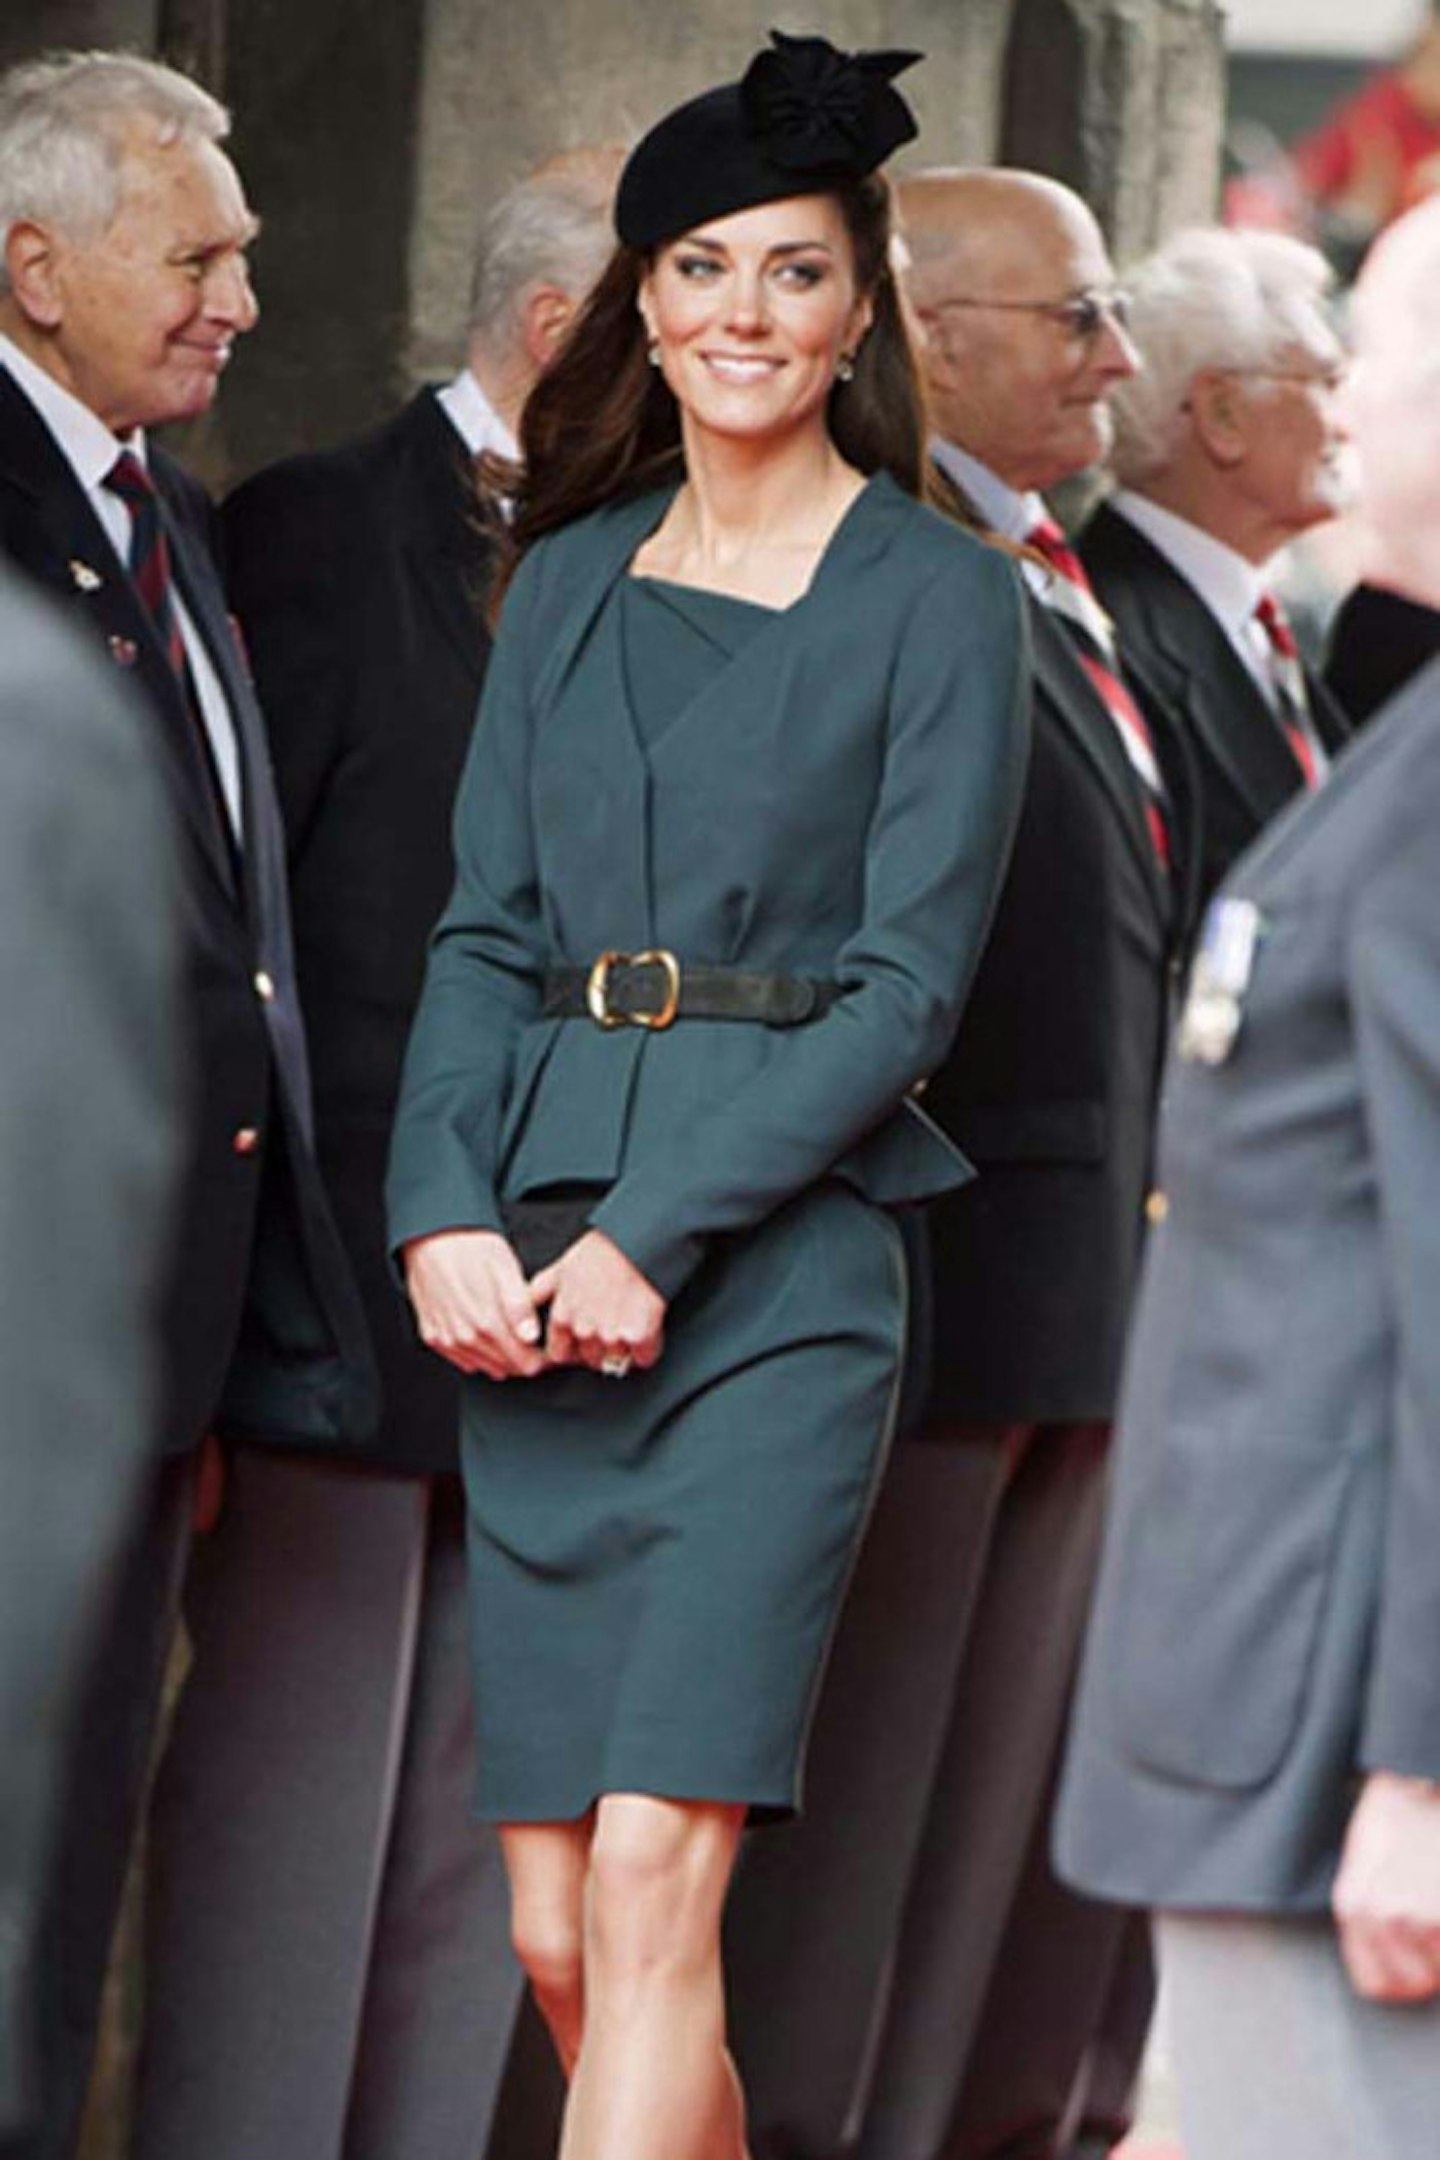 Kate Middleton in LK Bennett, at The Queen's Jubilee Celebration, Leciester, 8 March 2012